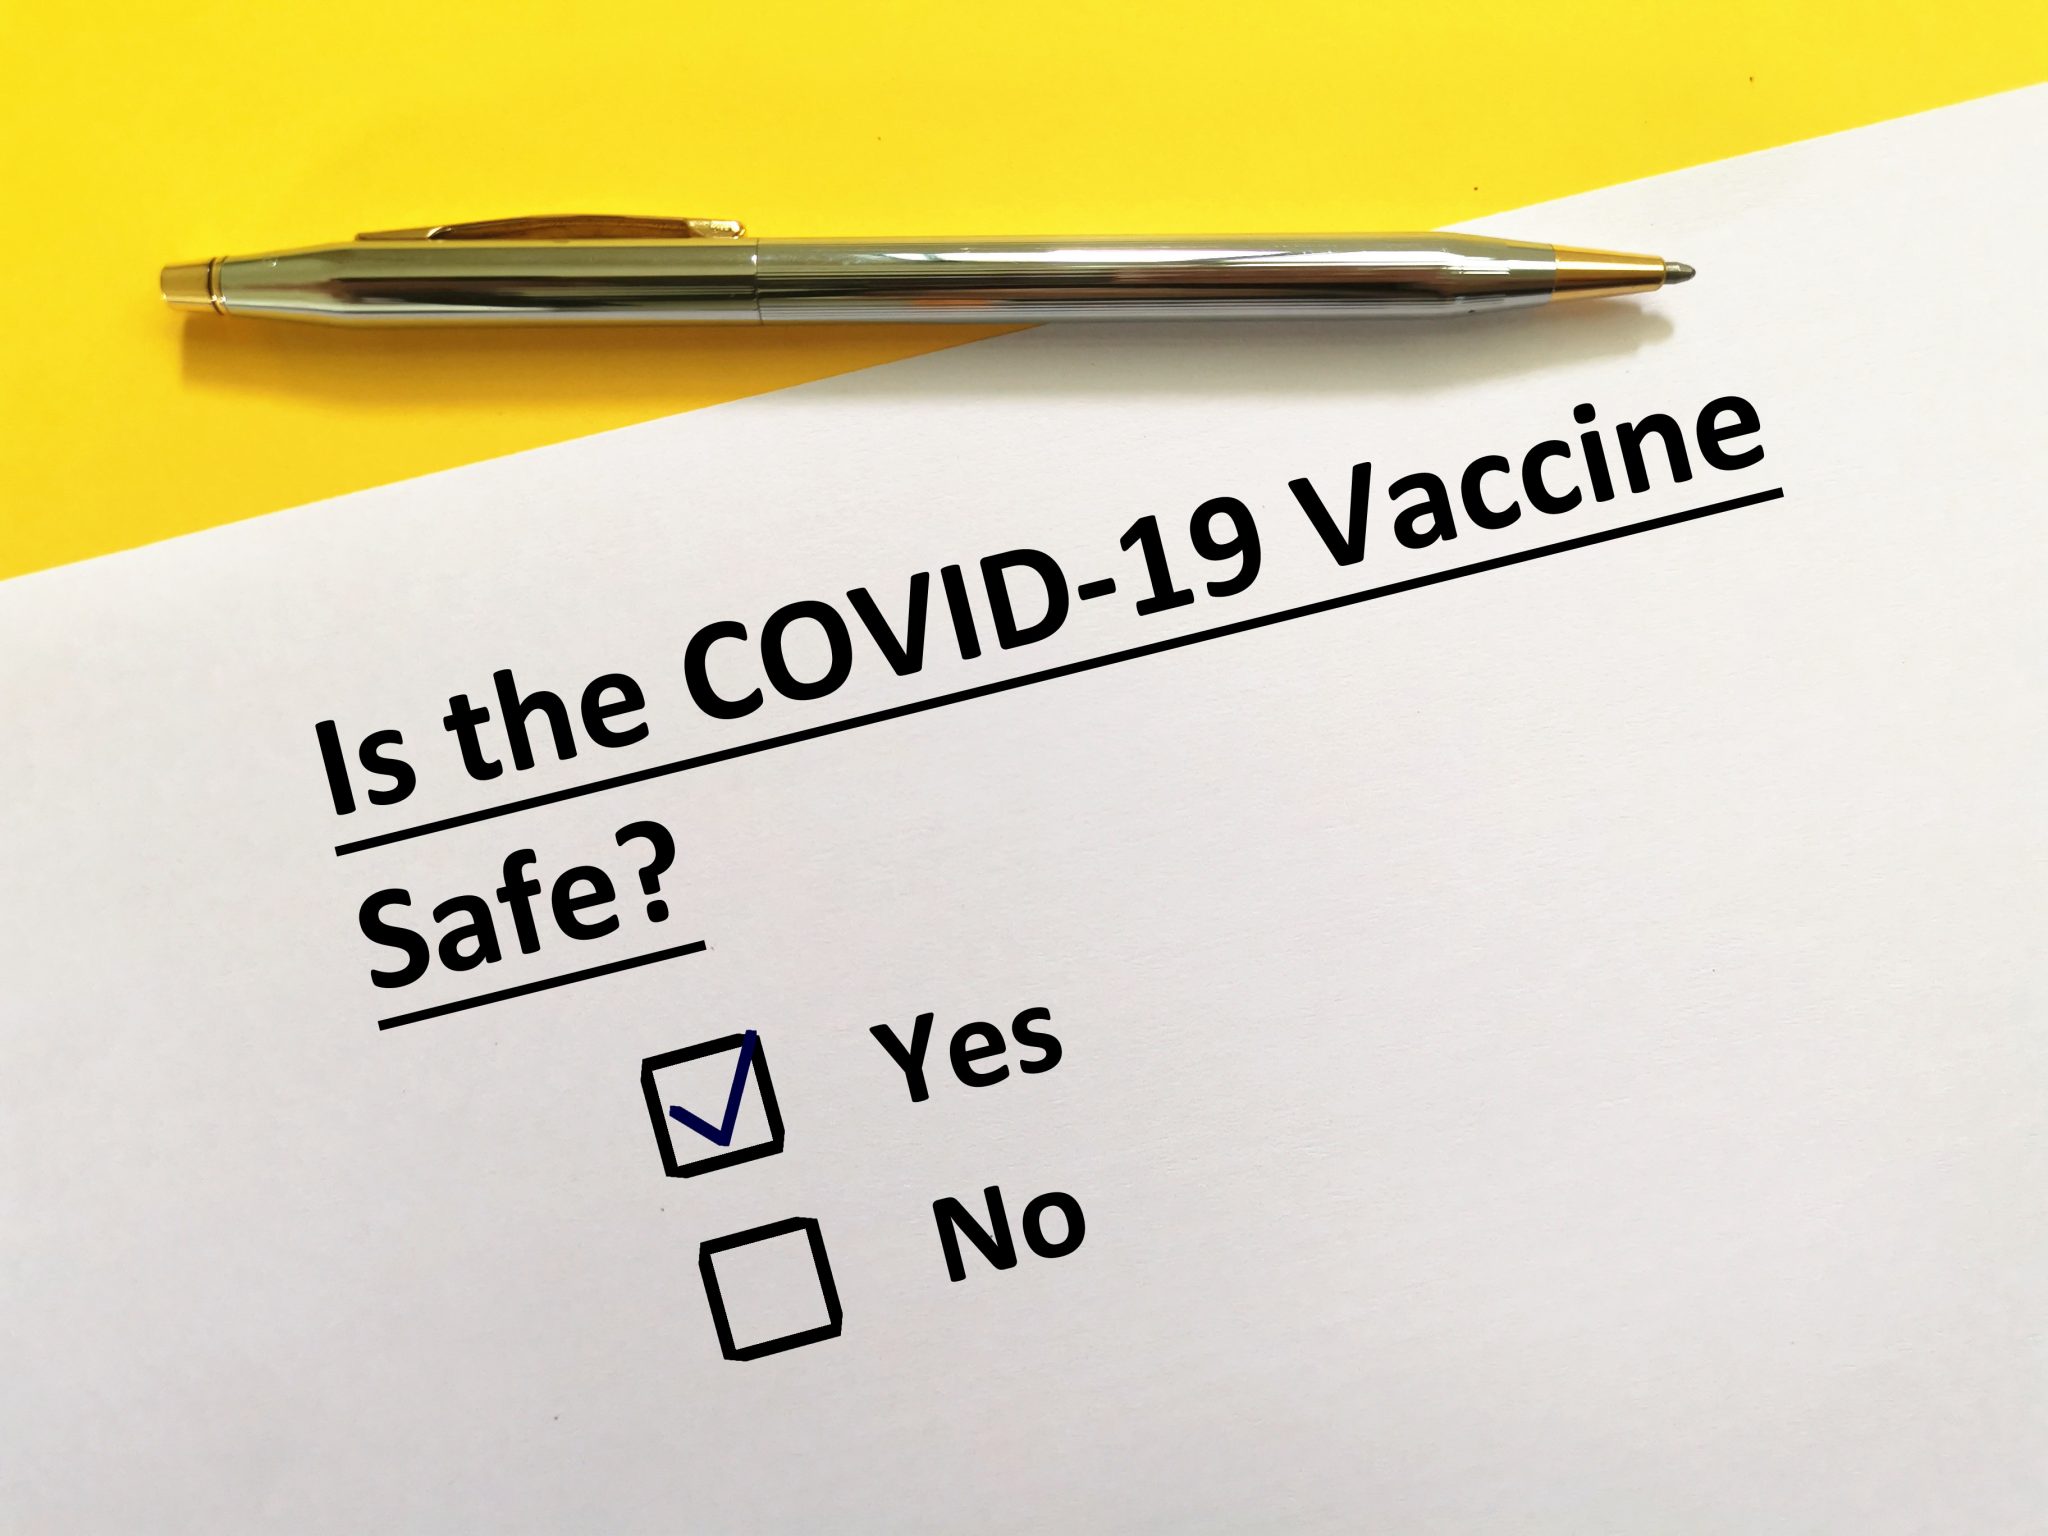 Is the COVID-19 vaccine safe?